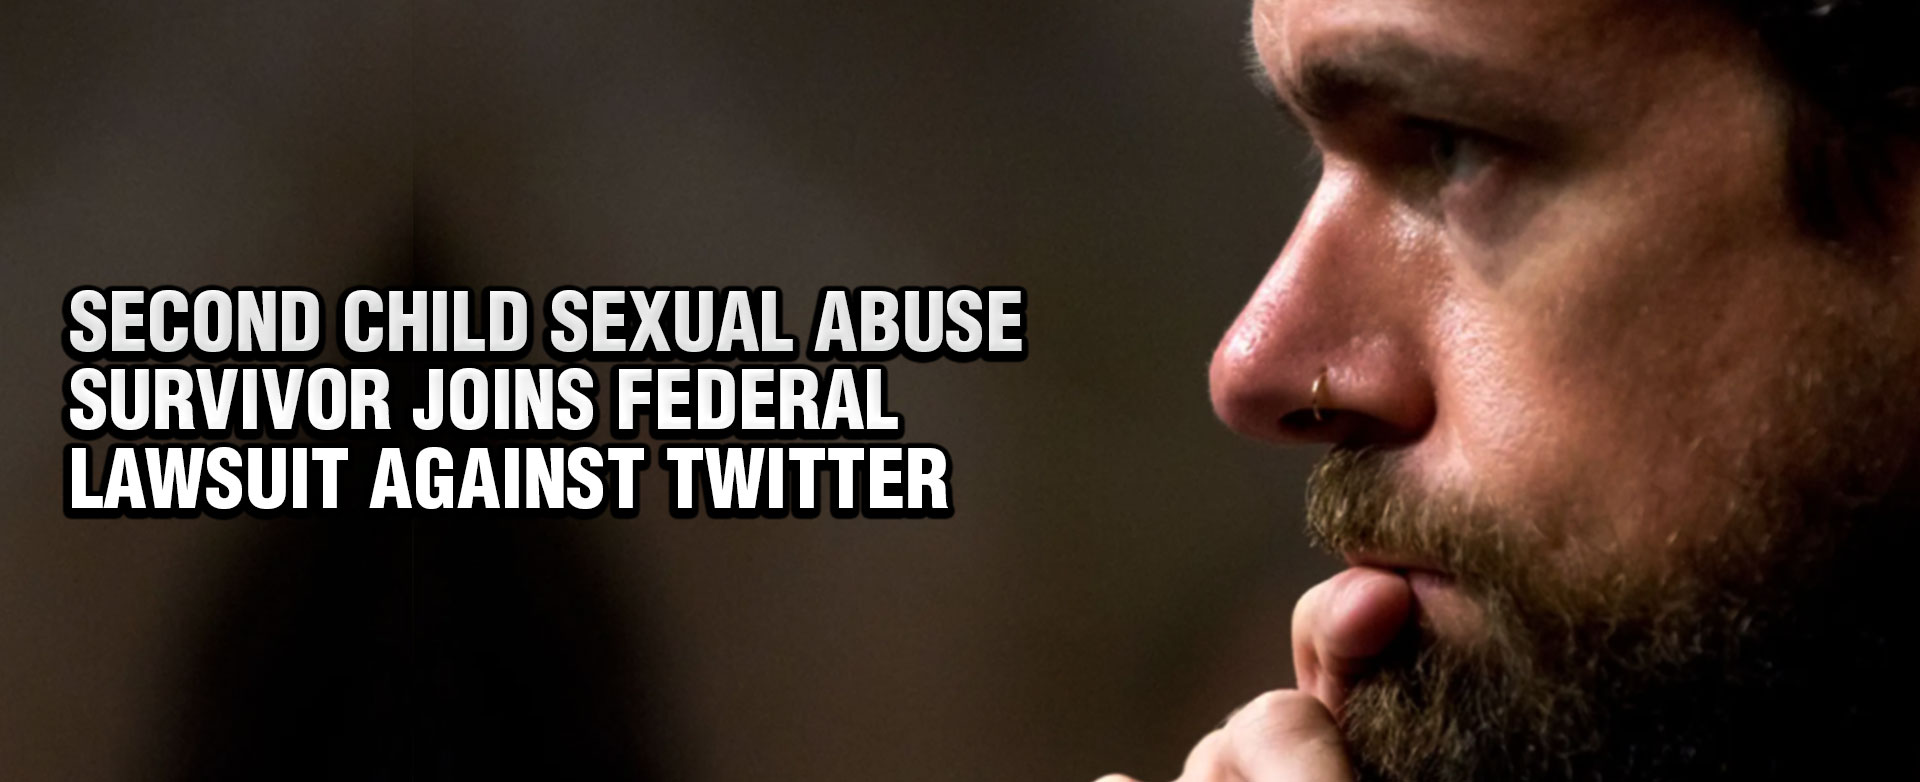 MyPatriotsNetwork-Second Child Sexual Abuse Survivor Joins Federal Lawsuit Against Twitter